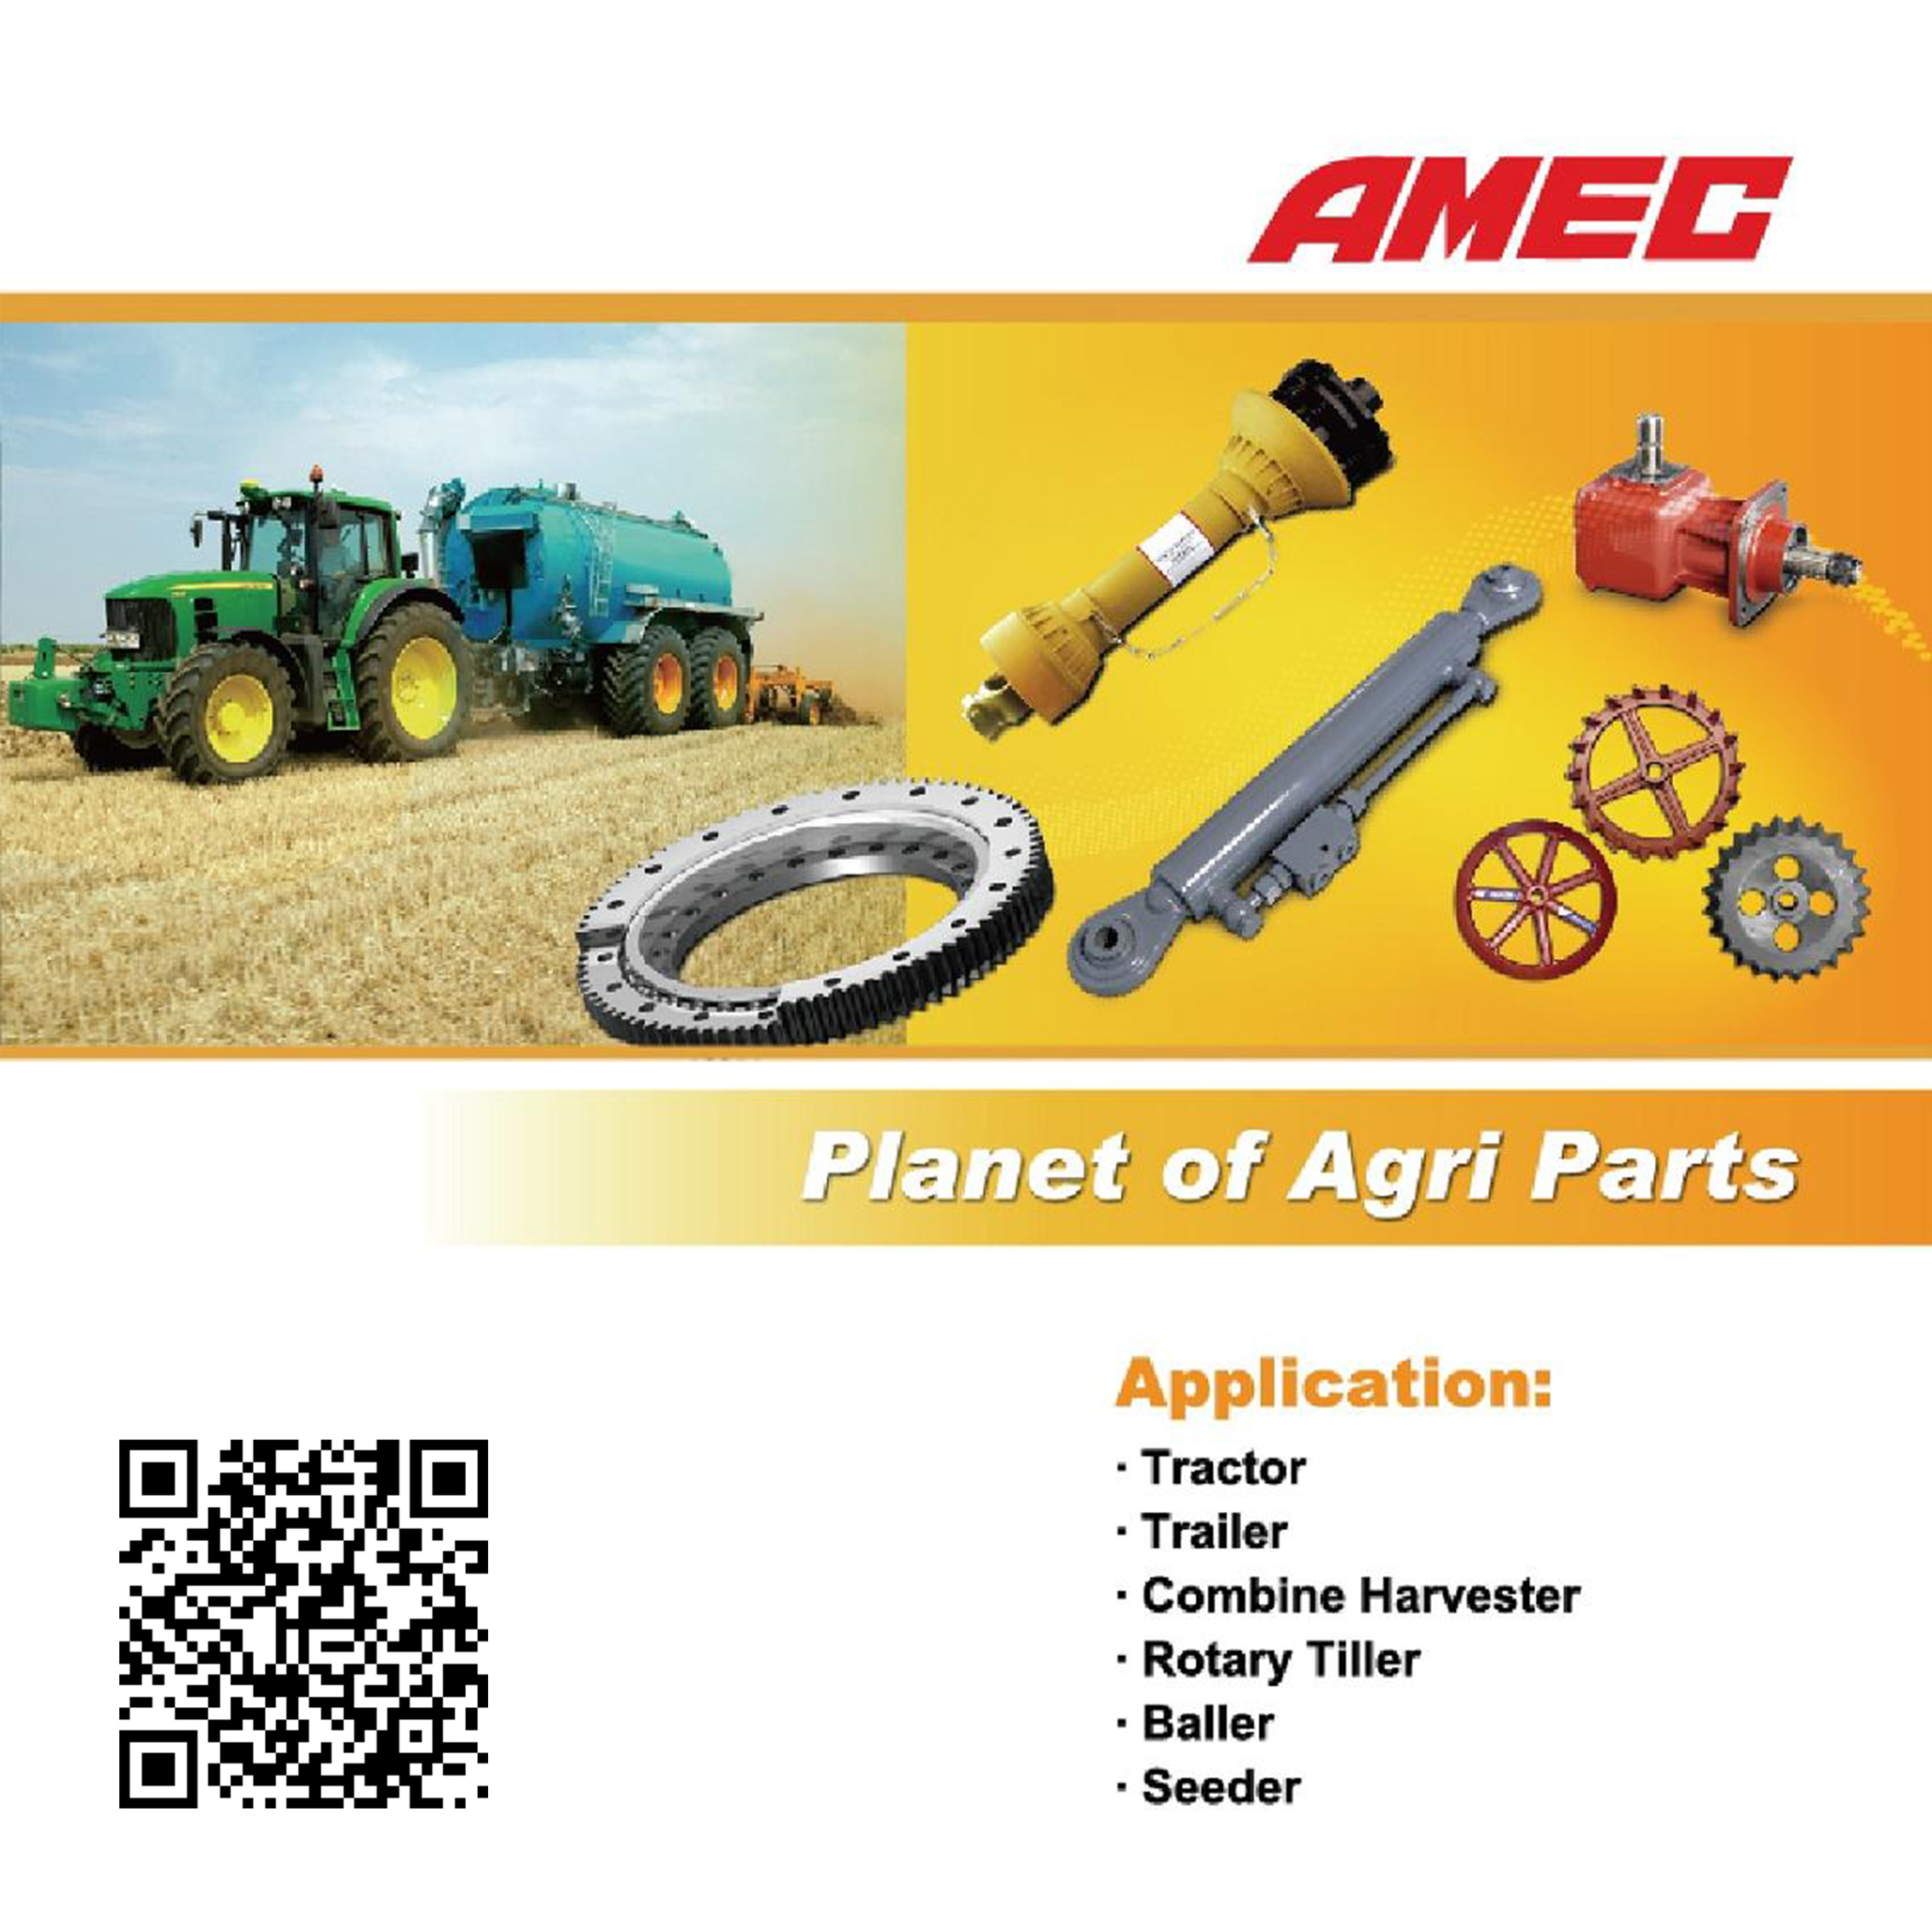 AGRICULTURAL MAINTENANCE TOOLS